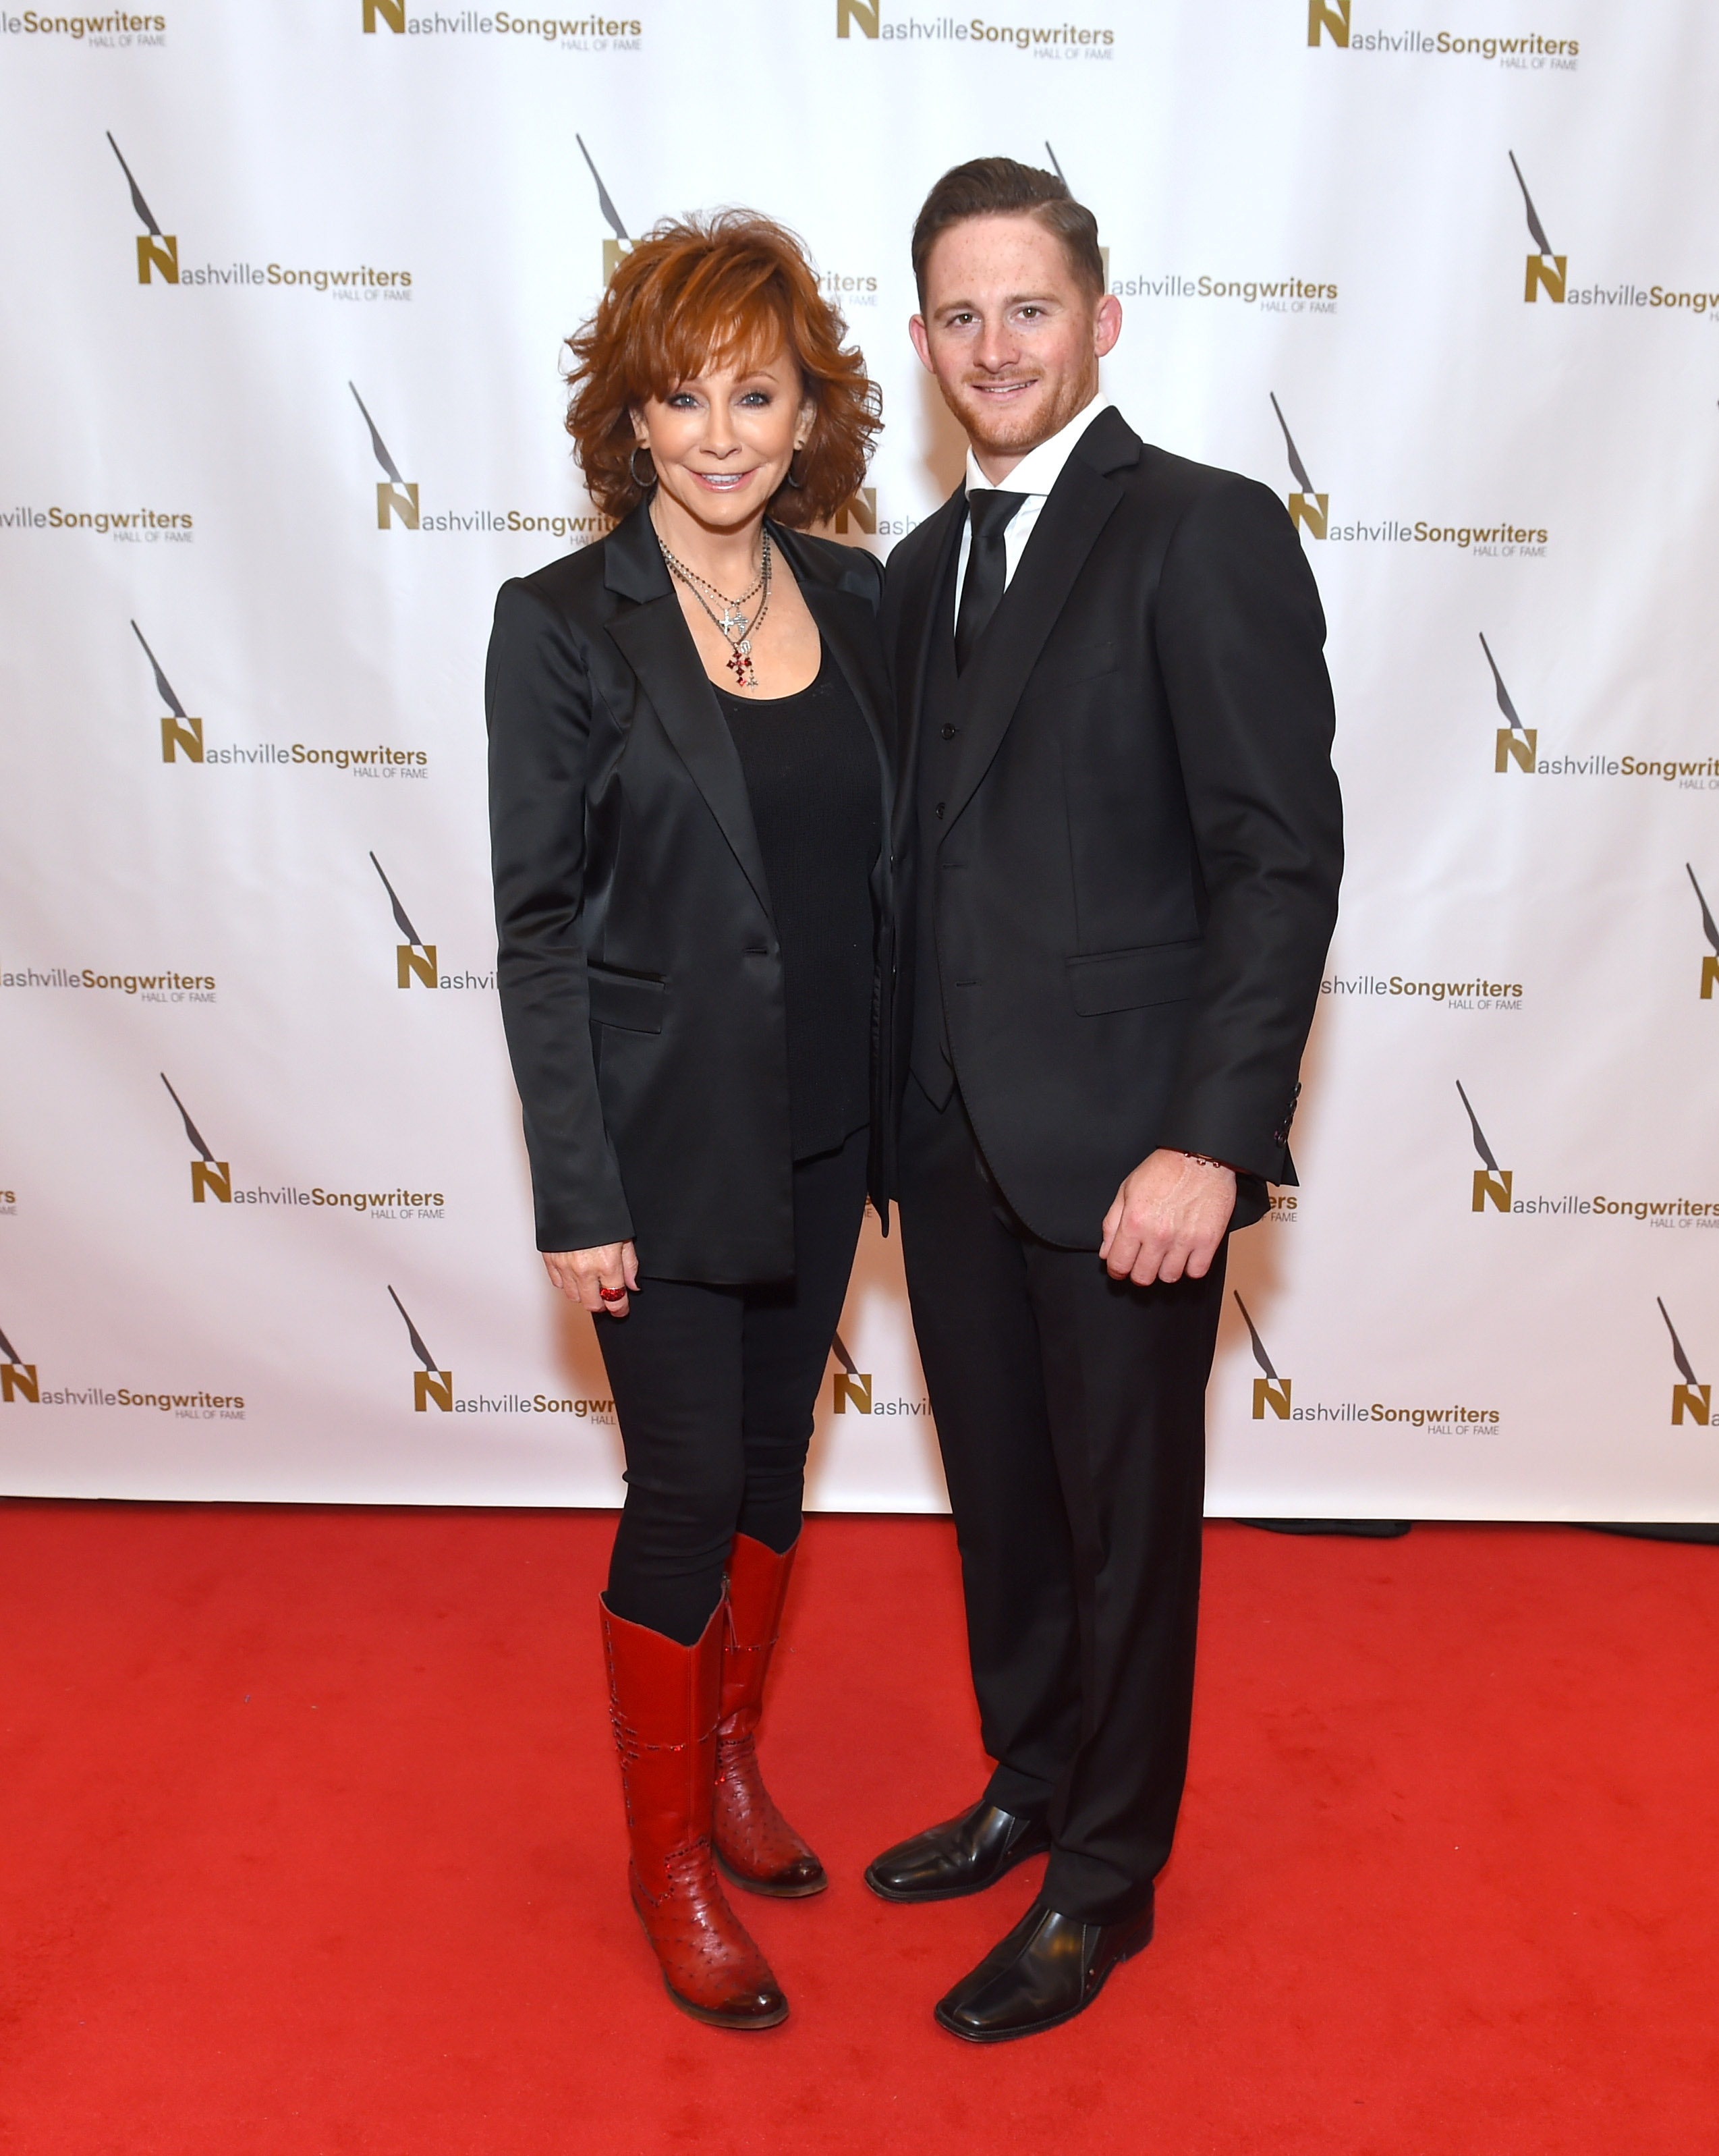 Reba McEntire and Shelby Blackstock at the 2018 Nashville Songwriters Hall Of Fame Gala | Source: Getty Images